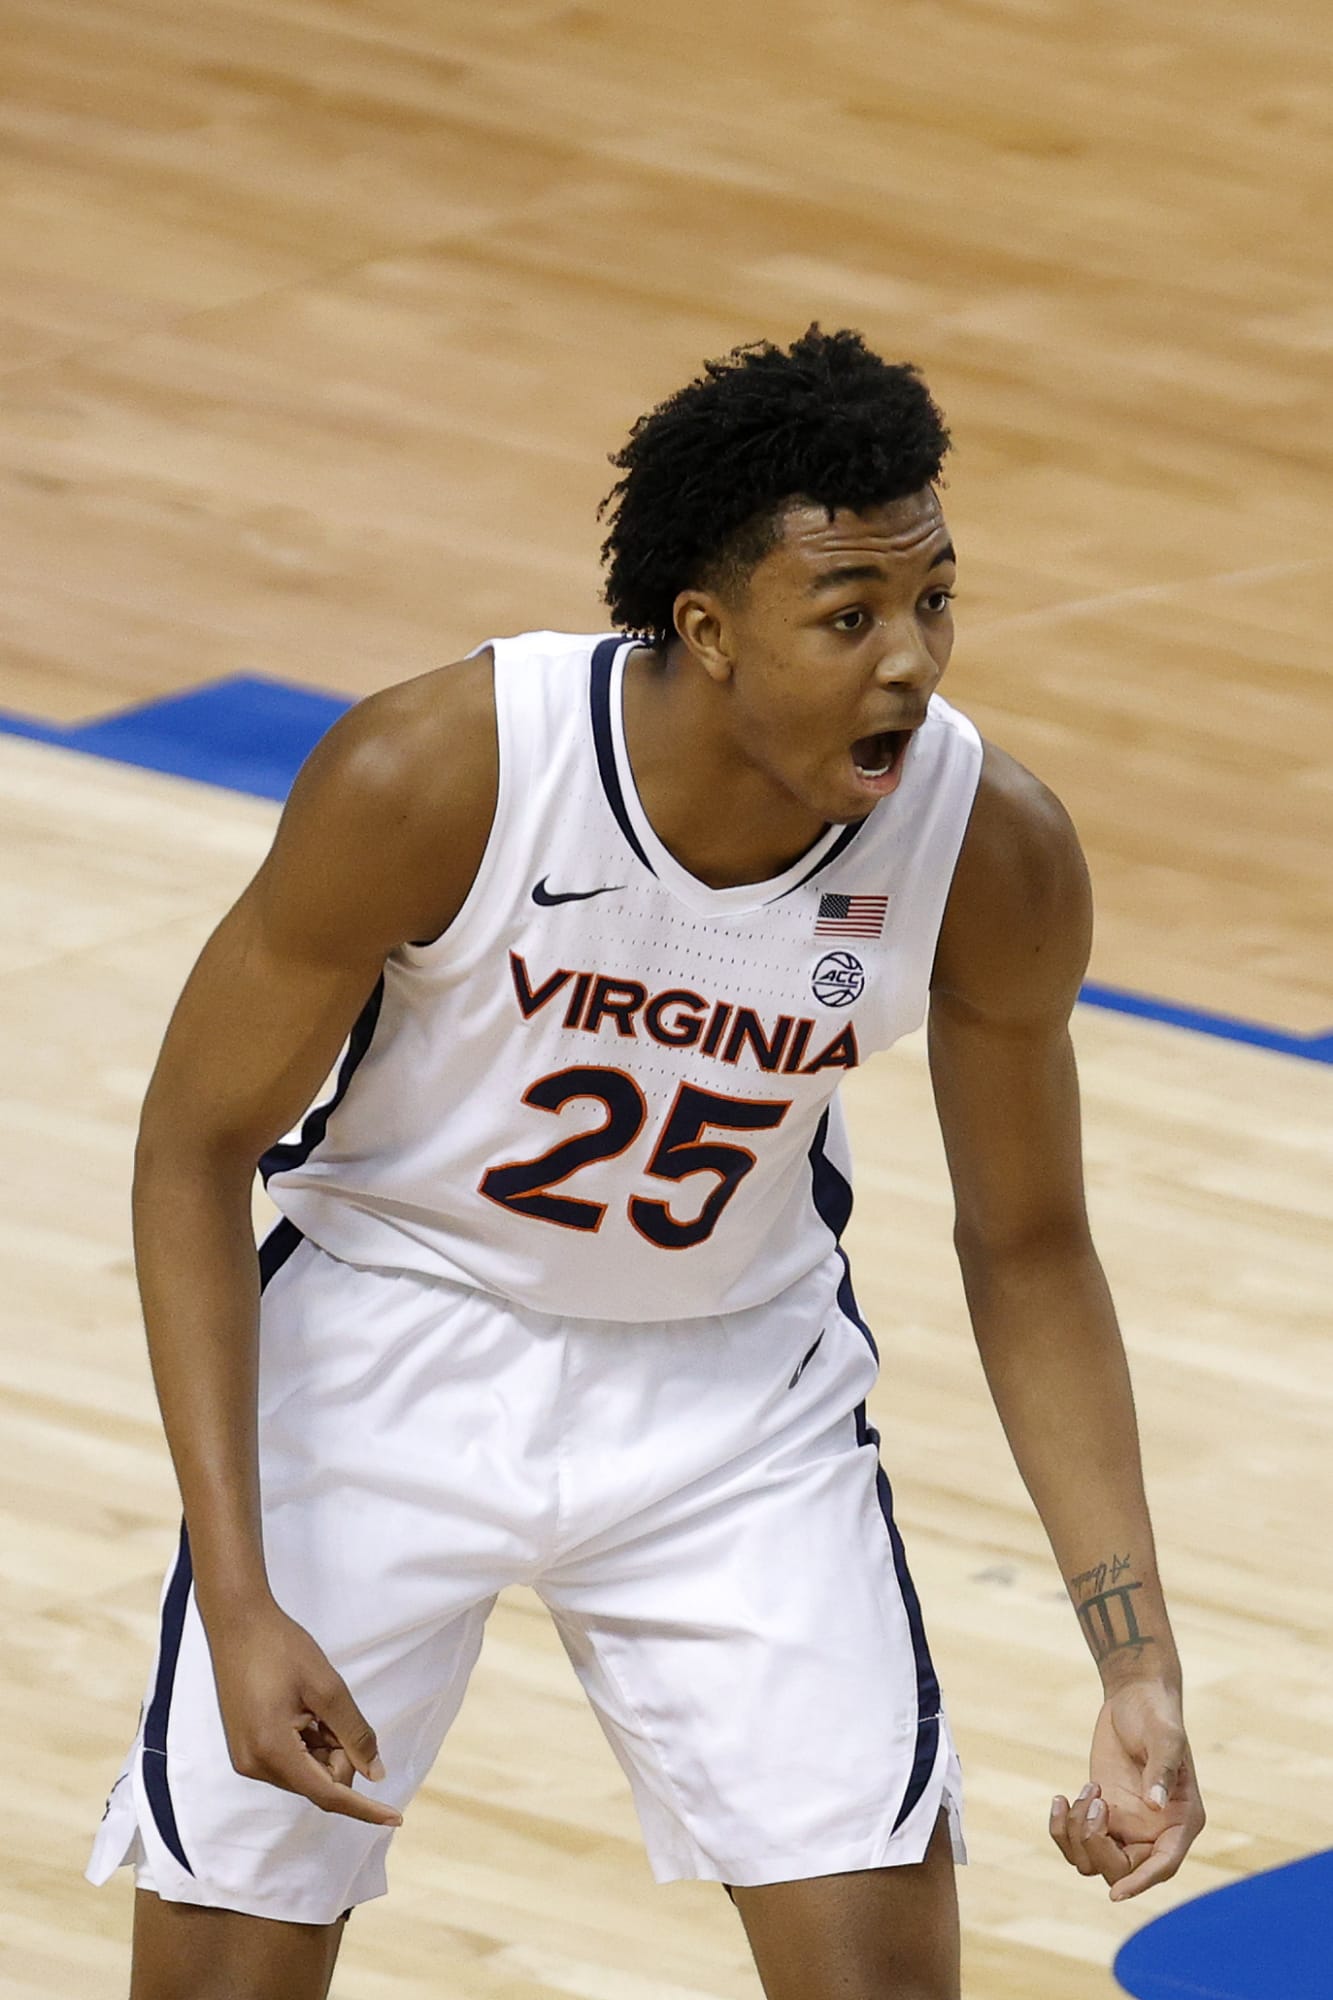 2021 NBA Draft Preview: Trey Murphy III a Target for Trade Back